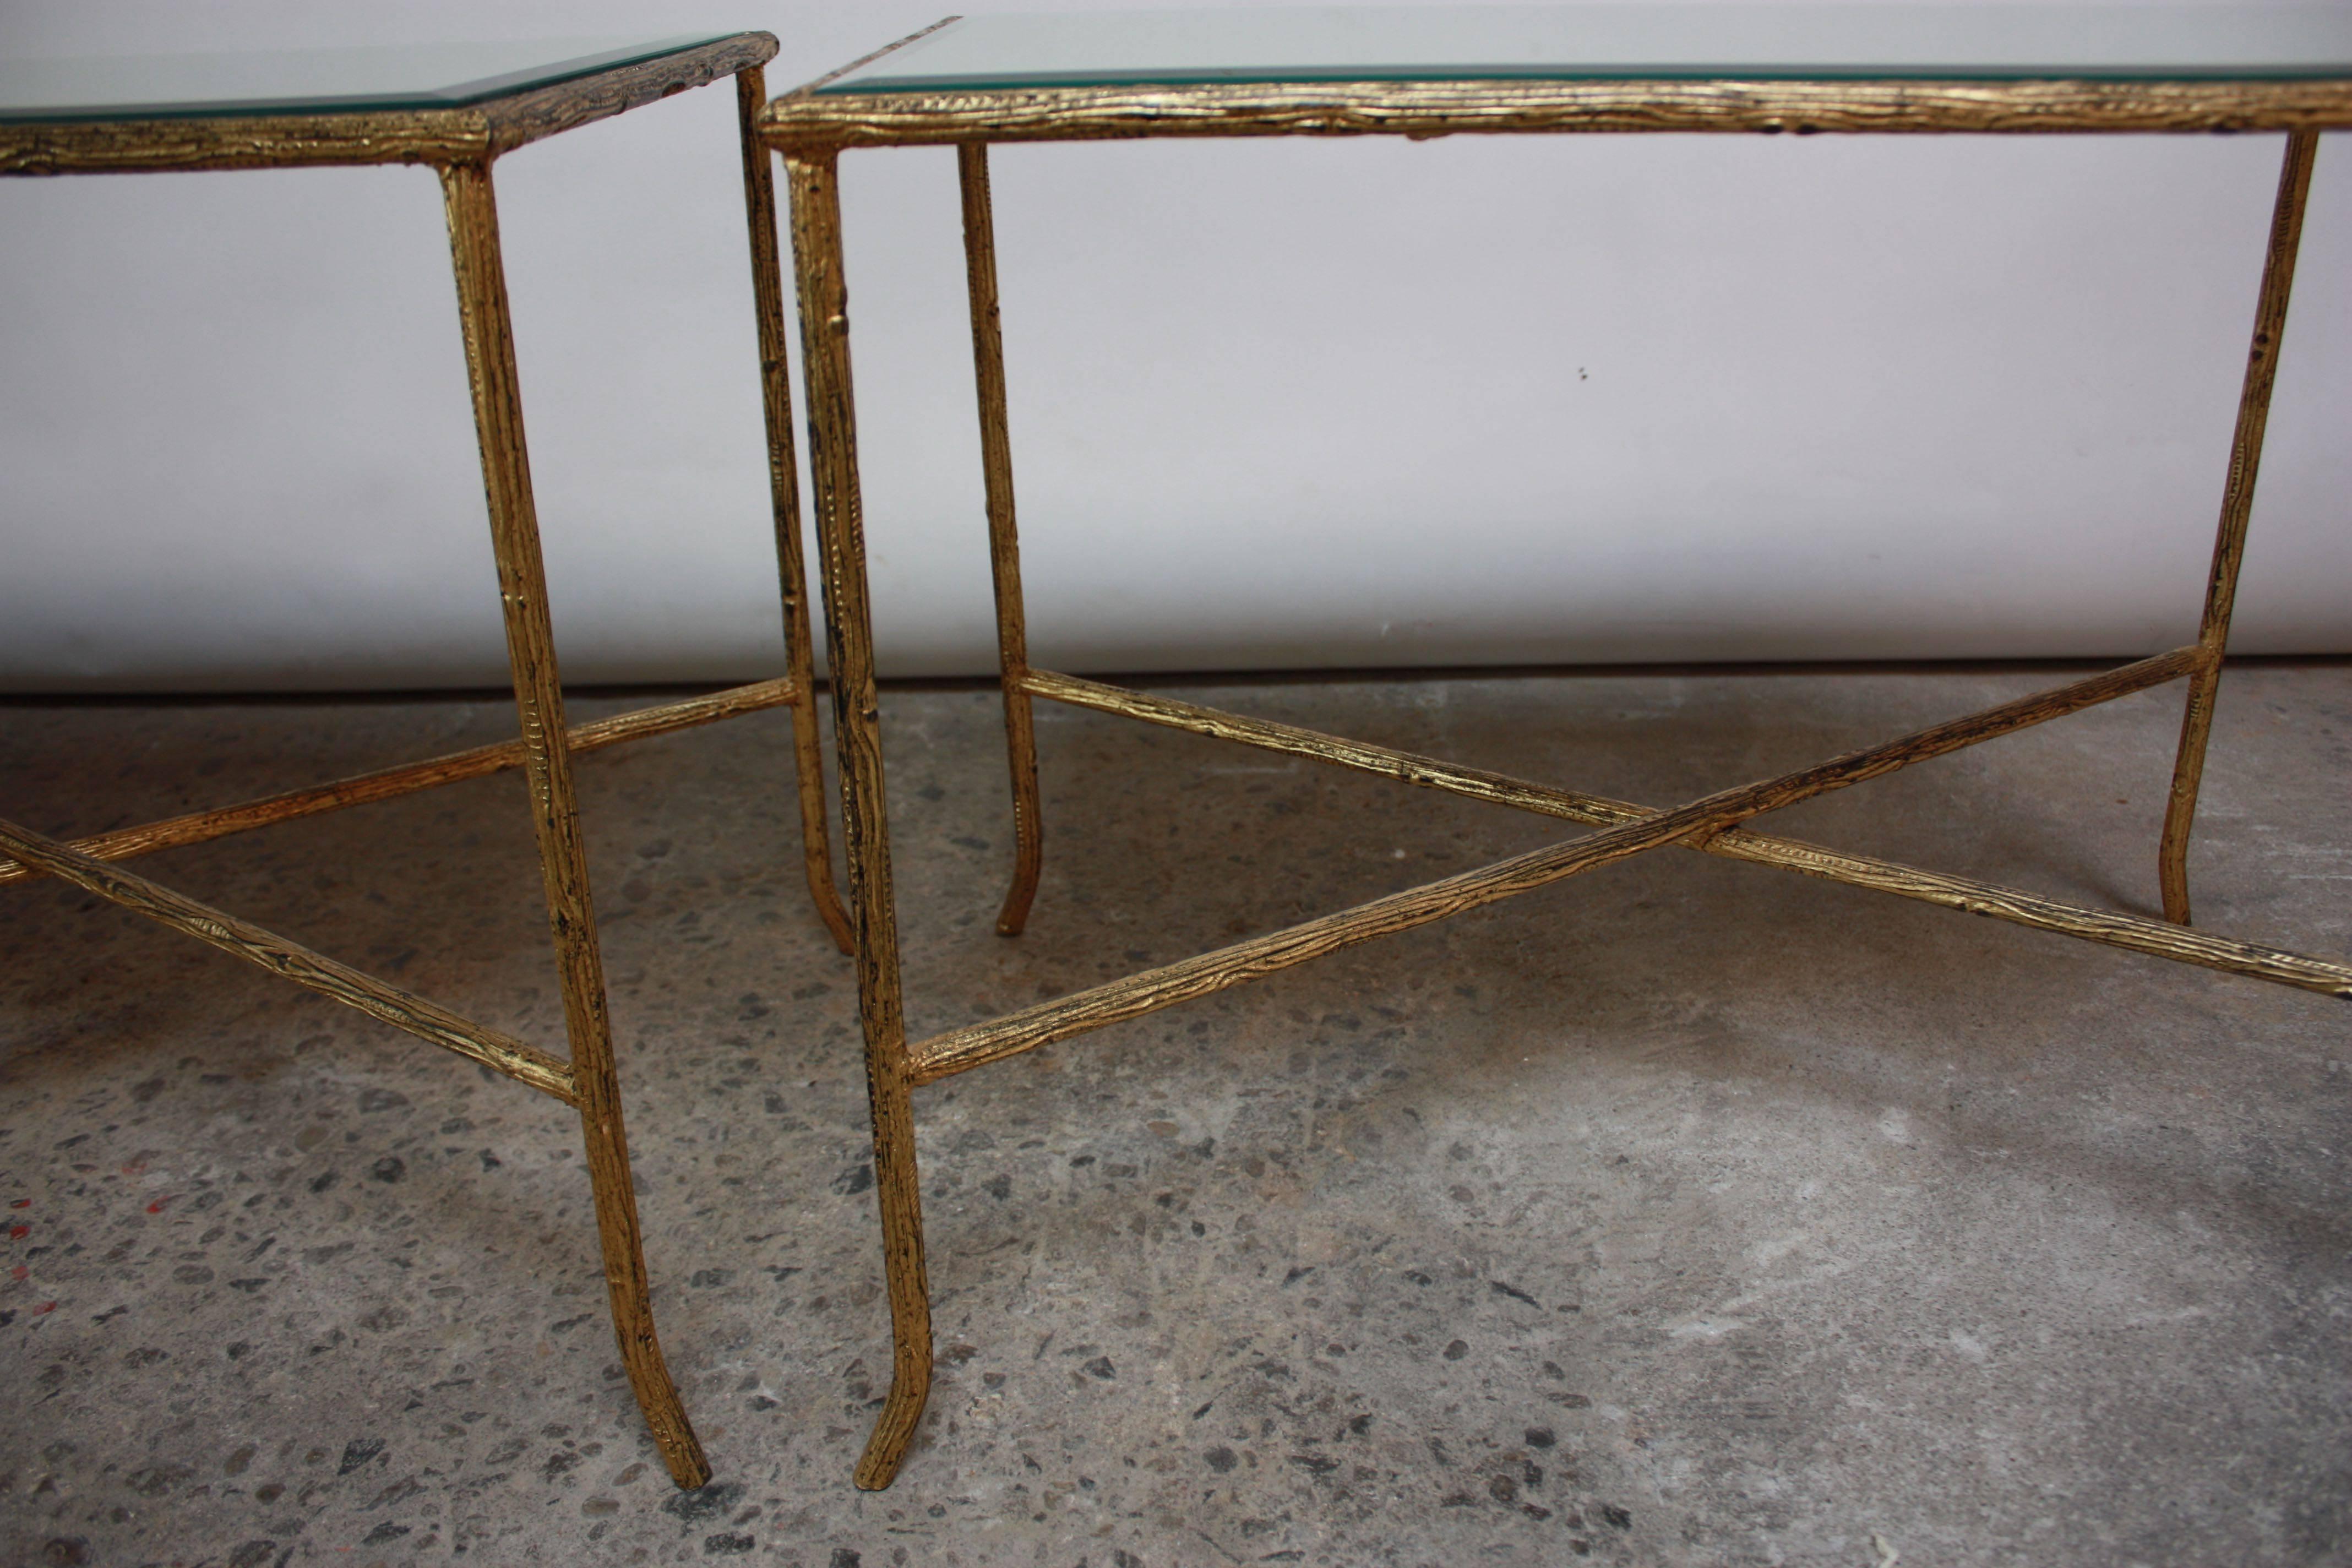 These Italian end tables are comprised of a heavily textured gilded-steel X-base frame and beveled mirror inserts. There is one scratch to one of the mirror tops, but otherwise these tables are in excellent, vintage condition.